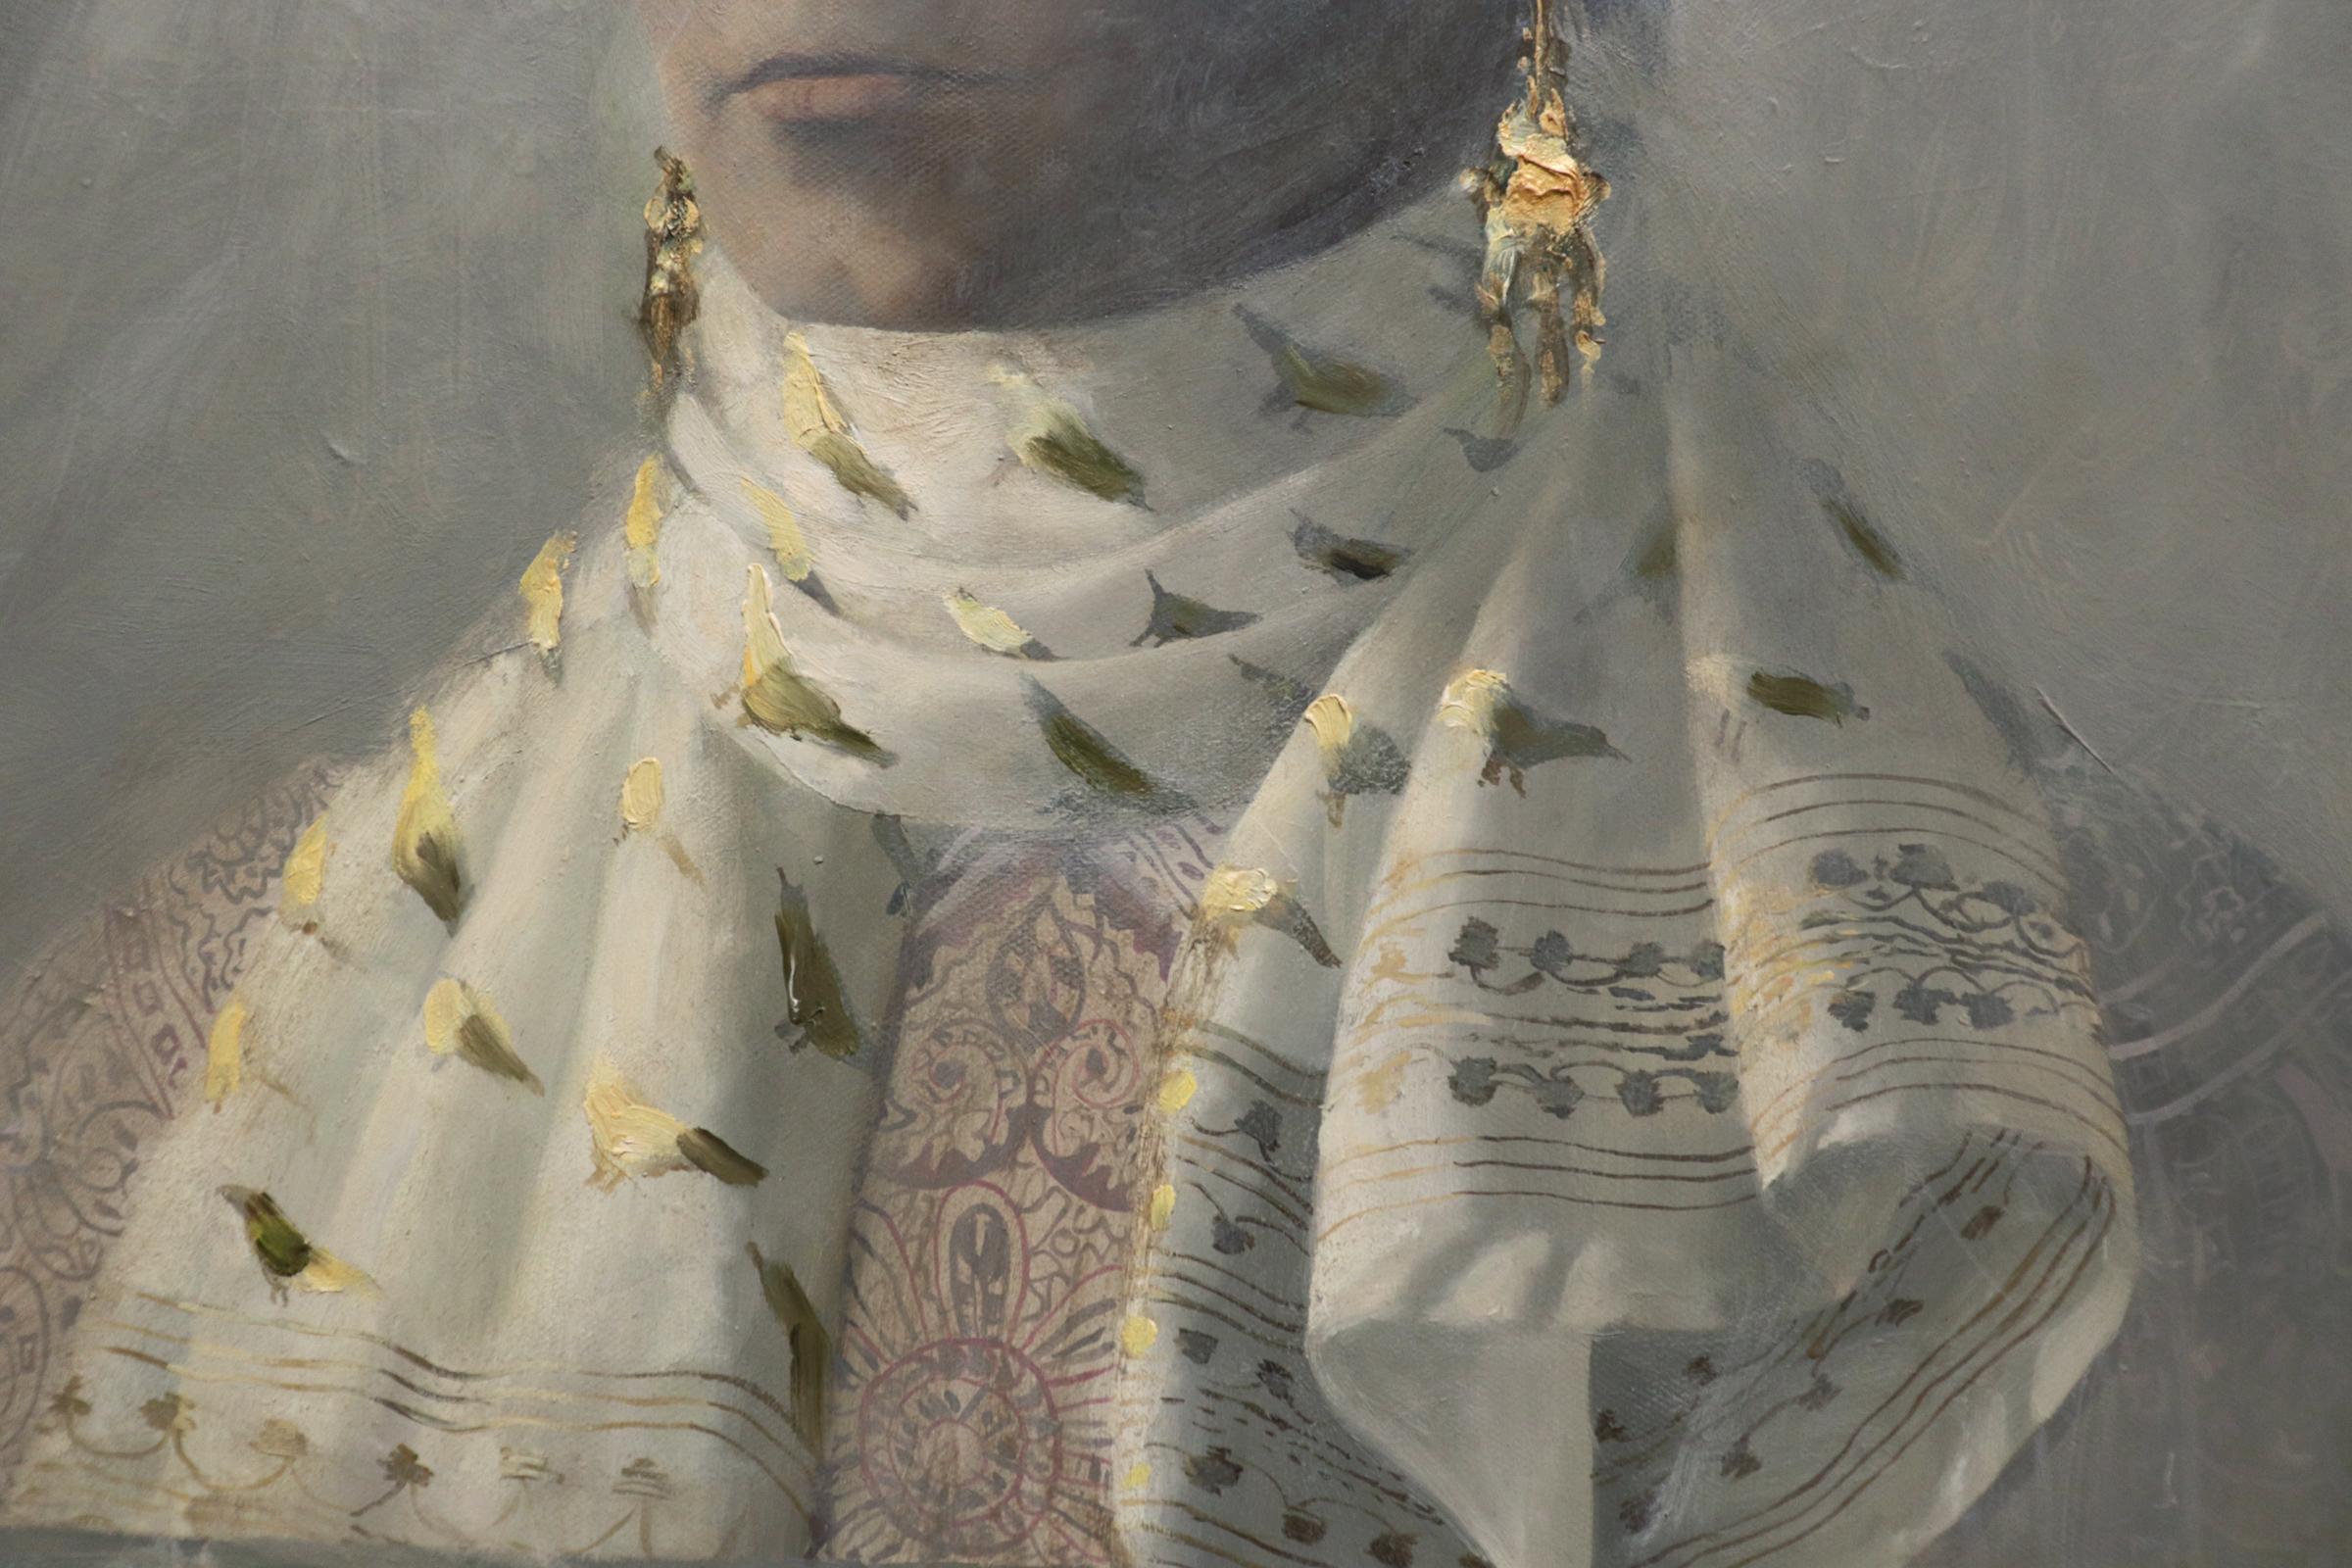 SELF PORTRAIT WITH SCARF - Female Portrait with Muted Colors and Gold Earrings - Feminist Painting by Olga Antonova